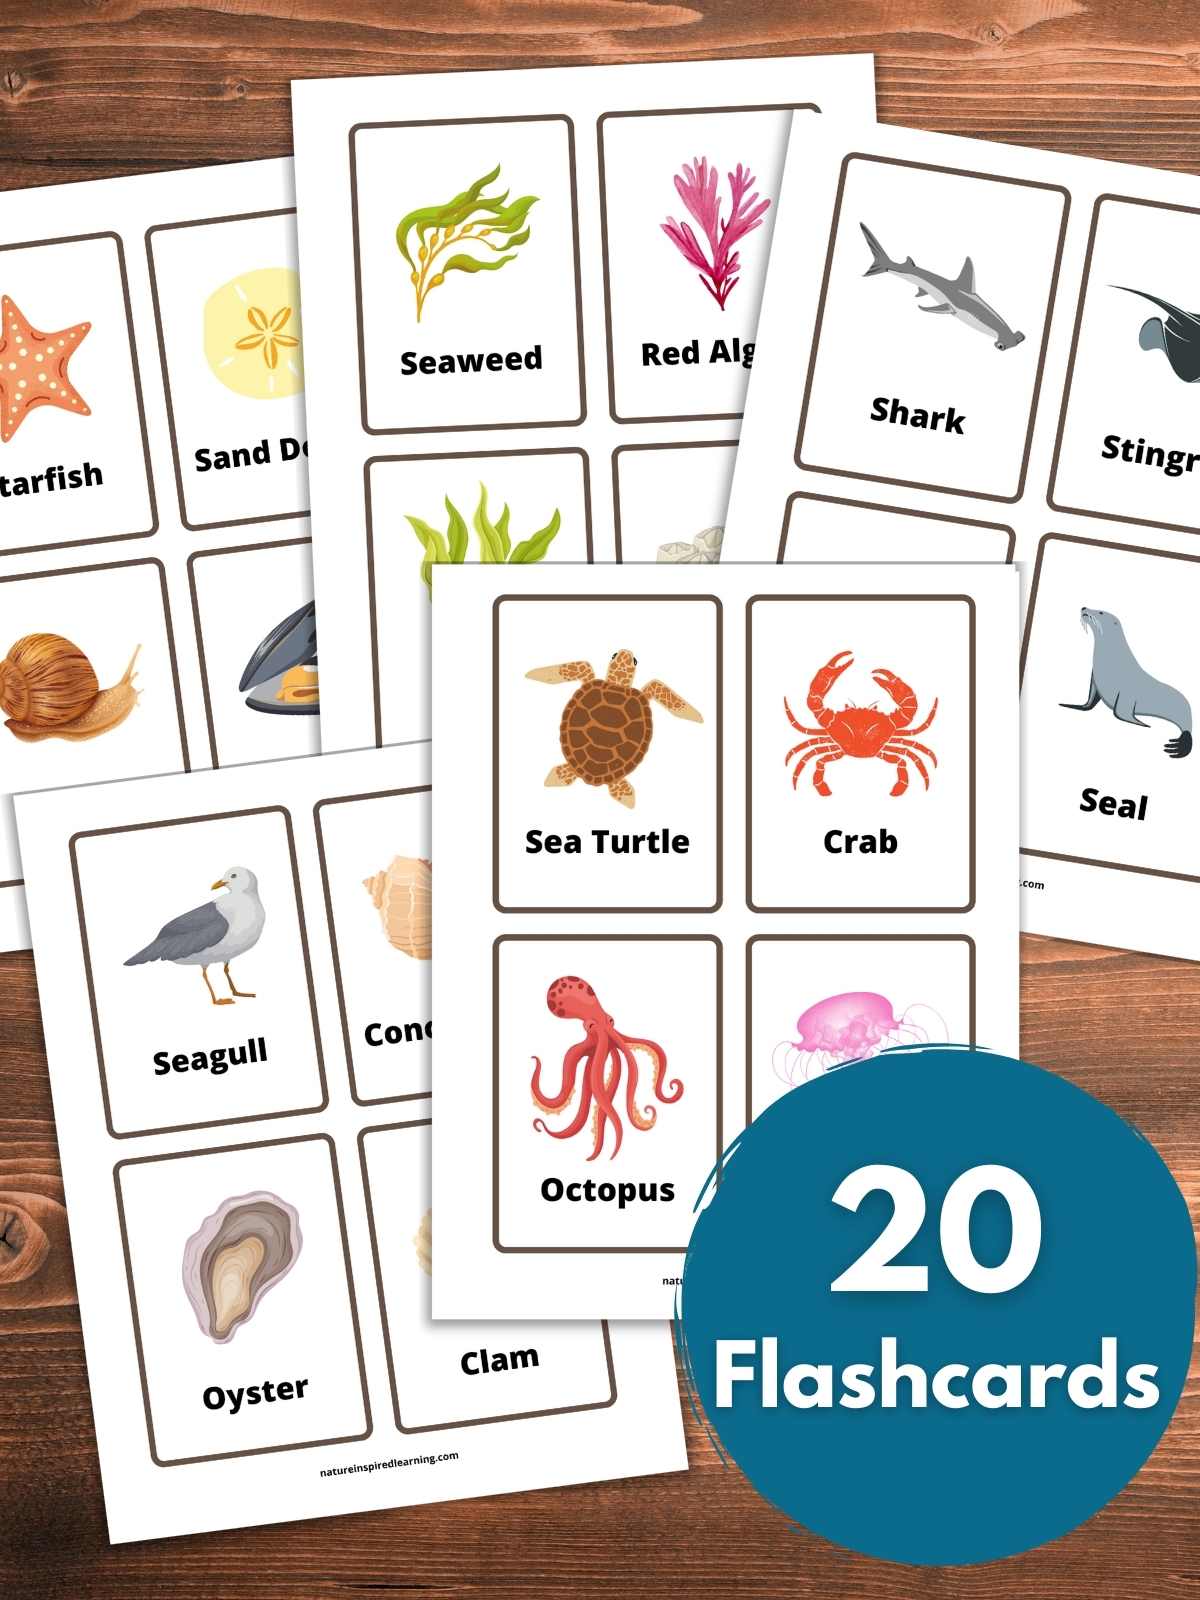 printed off set of flashcards with colorful beach and ocean designs overlapping on a wooden background. Blue circle bottom right with text overlay.